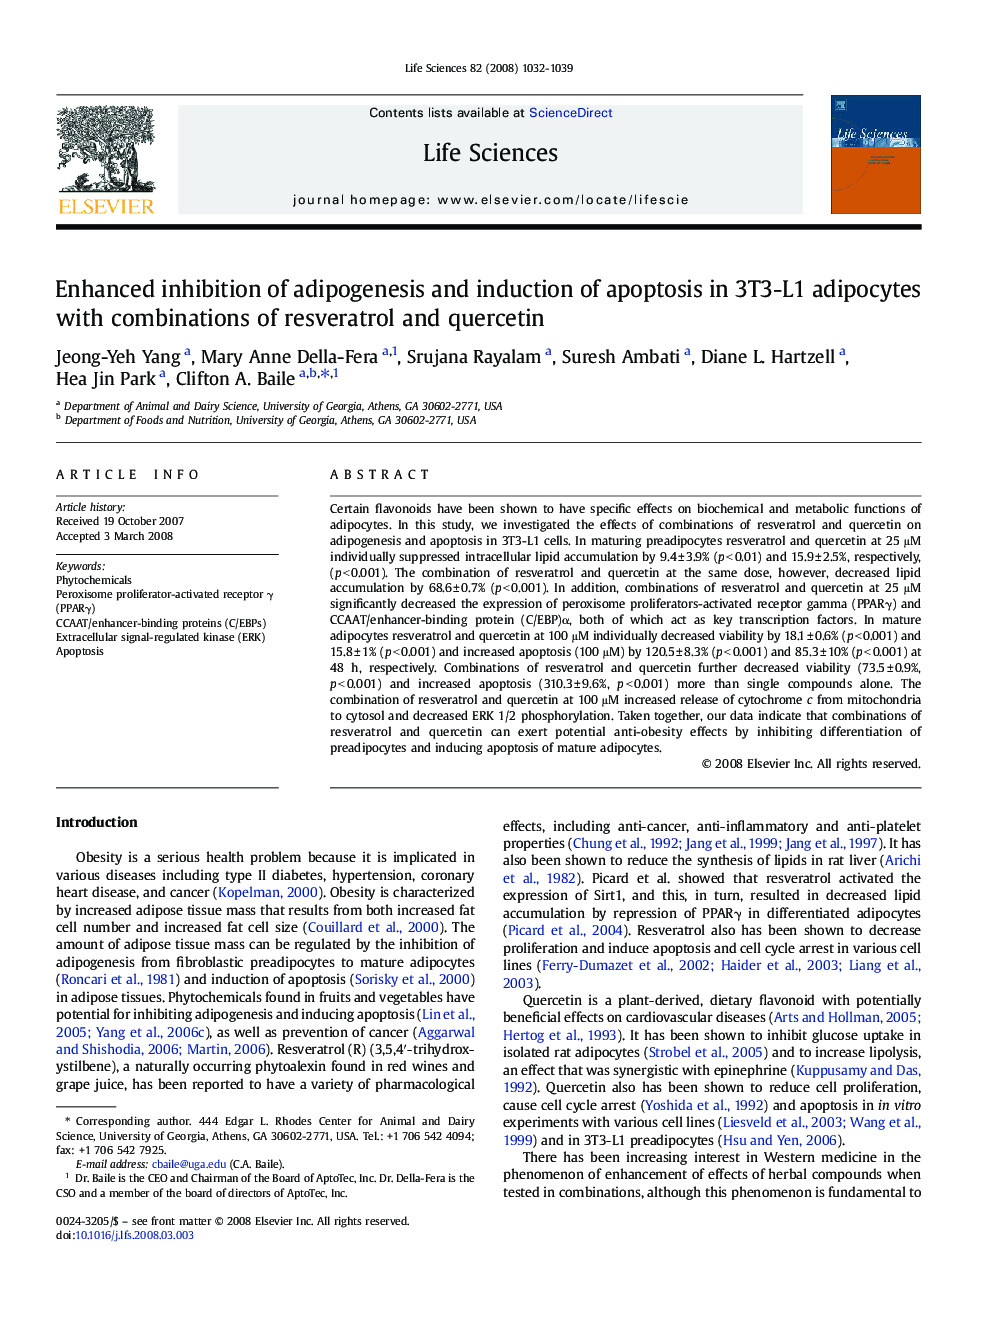 Enhanced inhibition of adipogenesis and induction of apoptosis in 3T3-L1 adipocytes with combinations of resveratrol and quercetin